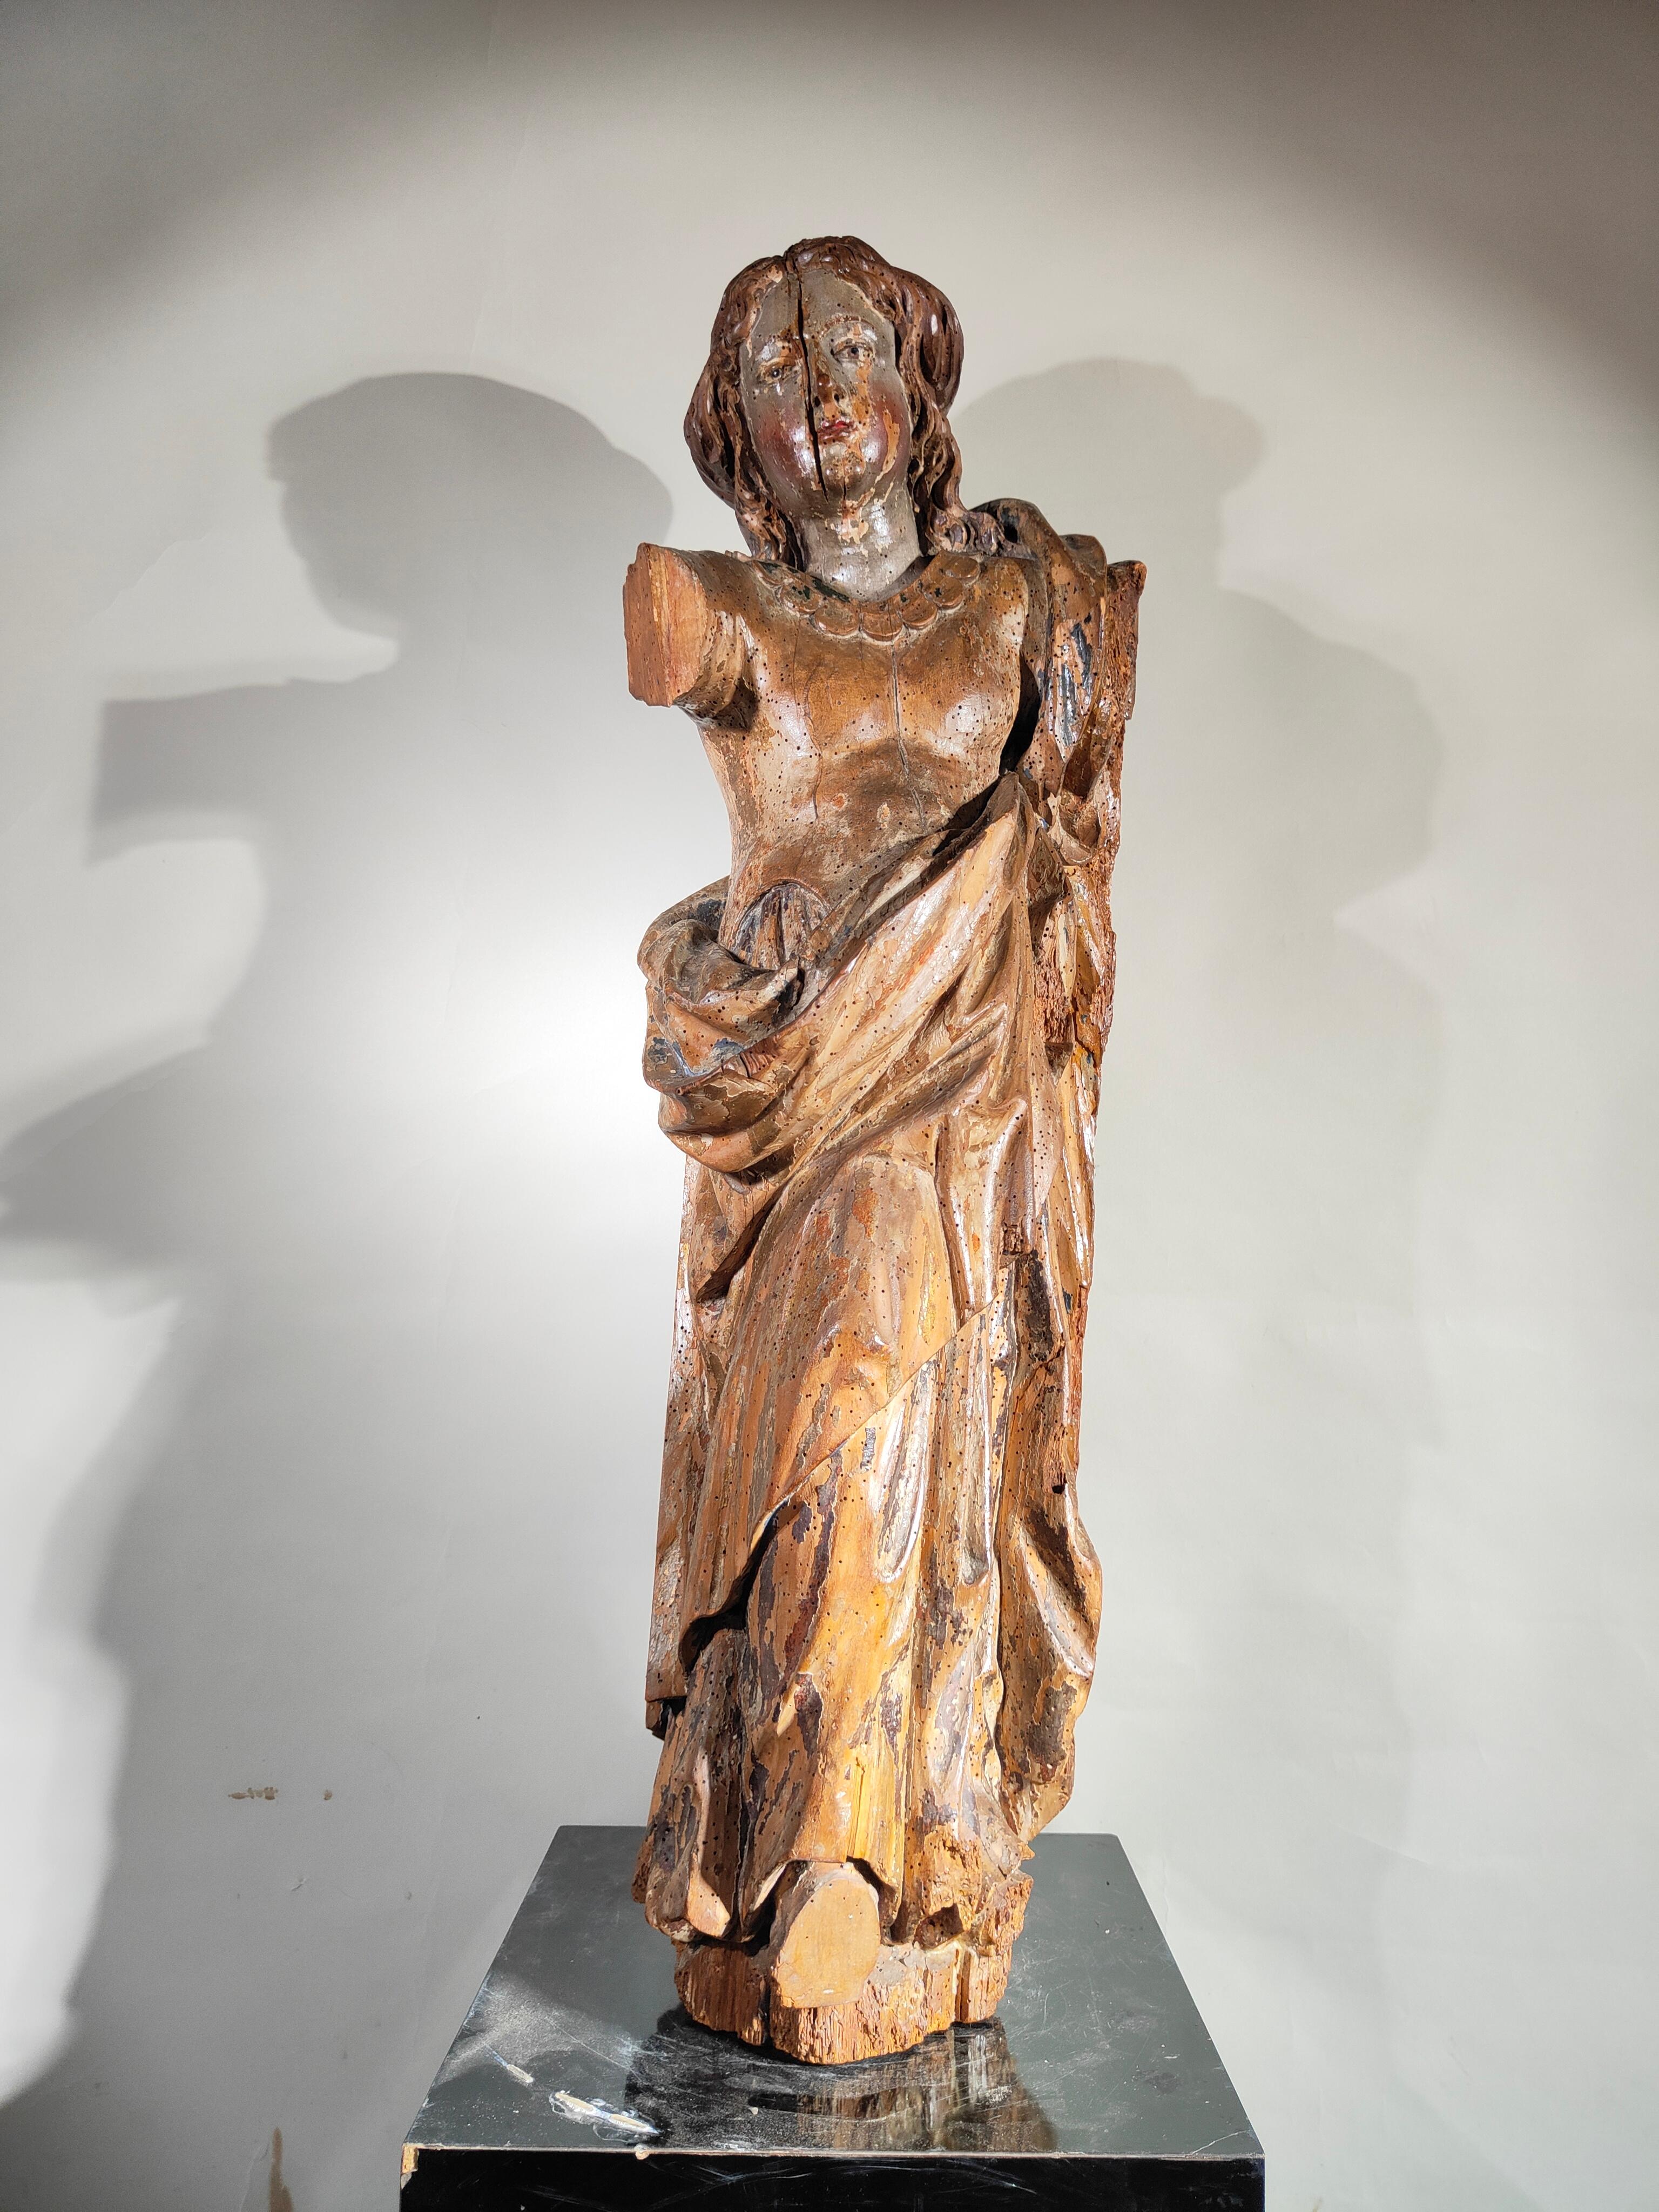 This exceptional sculpture, finely carved from solid wood and dating back to the 18th century, pays tribute to the devotion and artistic skill of its era. Depicting the Virgin Mary, the figure has been treated, consolidated, and meticulously